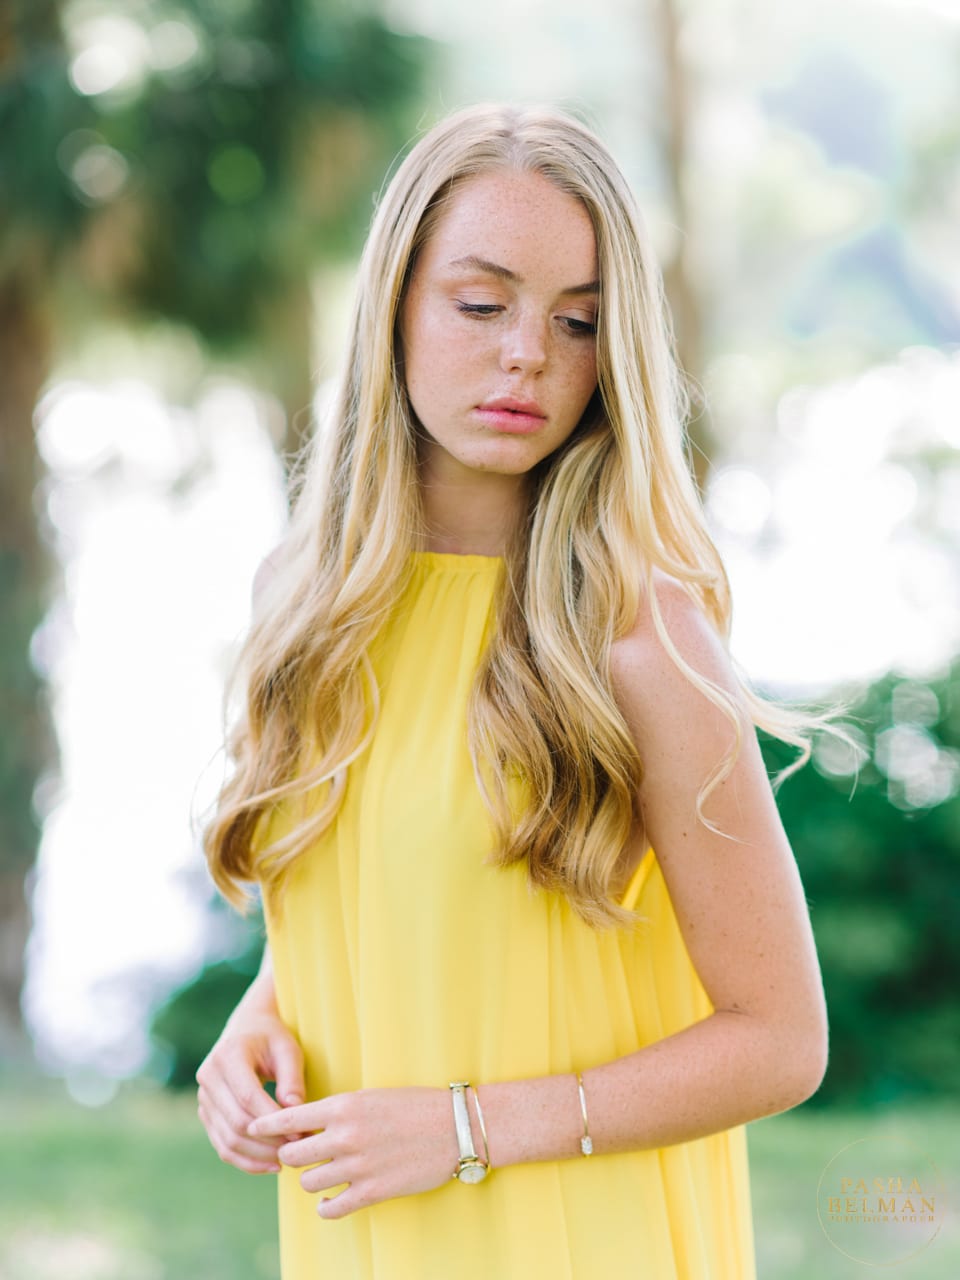 Amazing outfit Ideas for Senior Girls - High School Senior Portrait Session In Myrtle Beach by Pasha Belman Photography